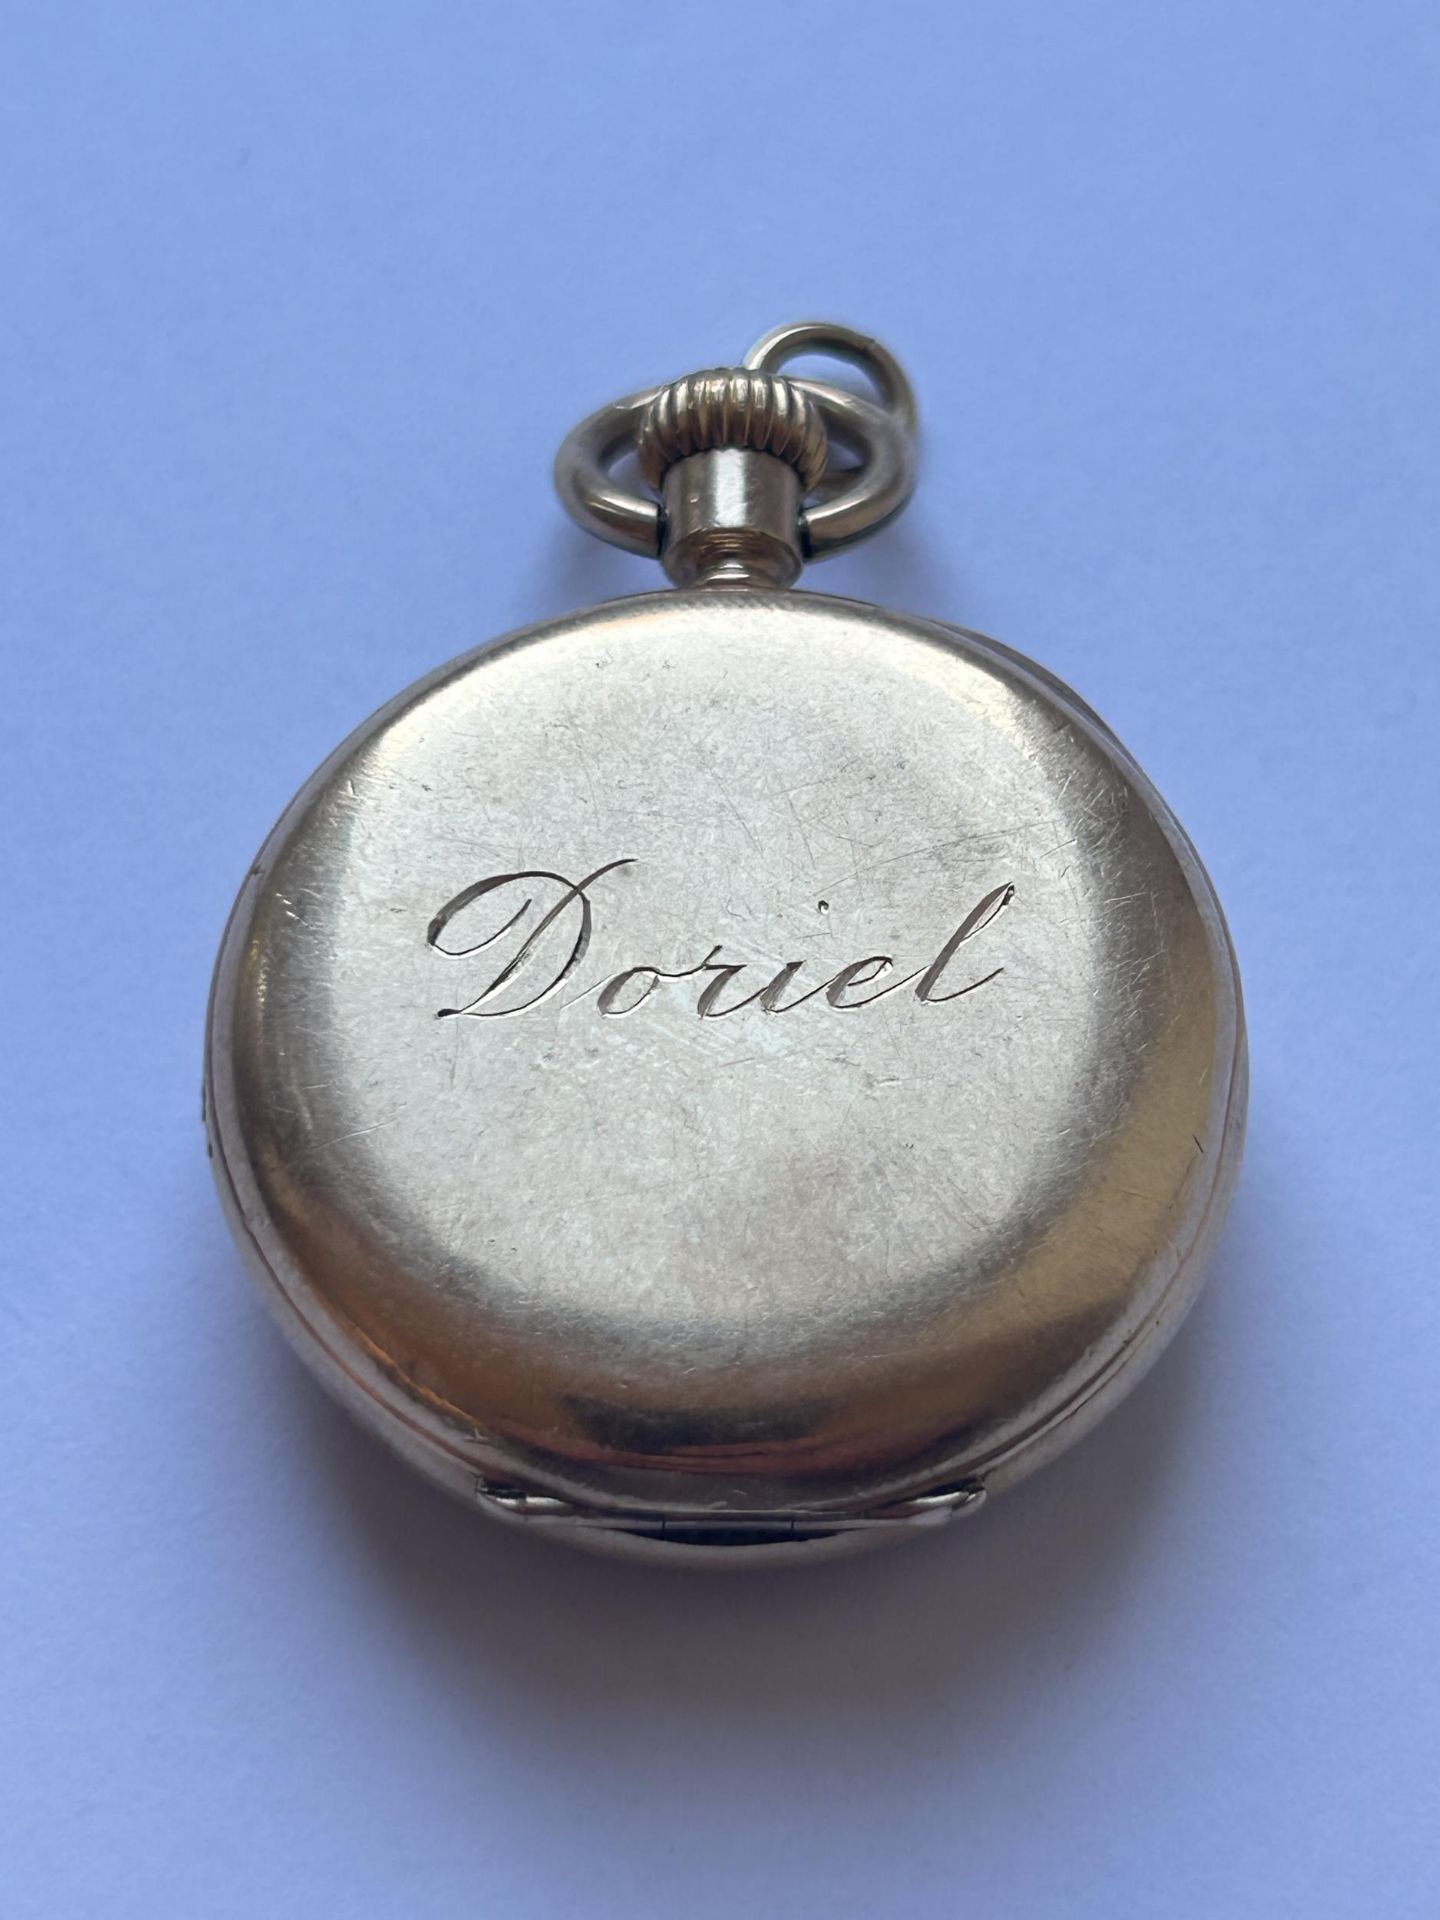 A 14CT GOLD LADIES OPEN FACED POCKET WATCH GROSS WEIGHT 40.20 GRAMS - Image 3 of 6